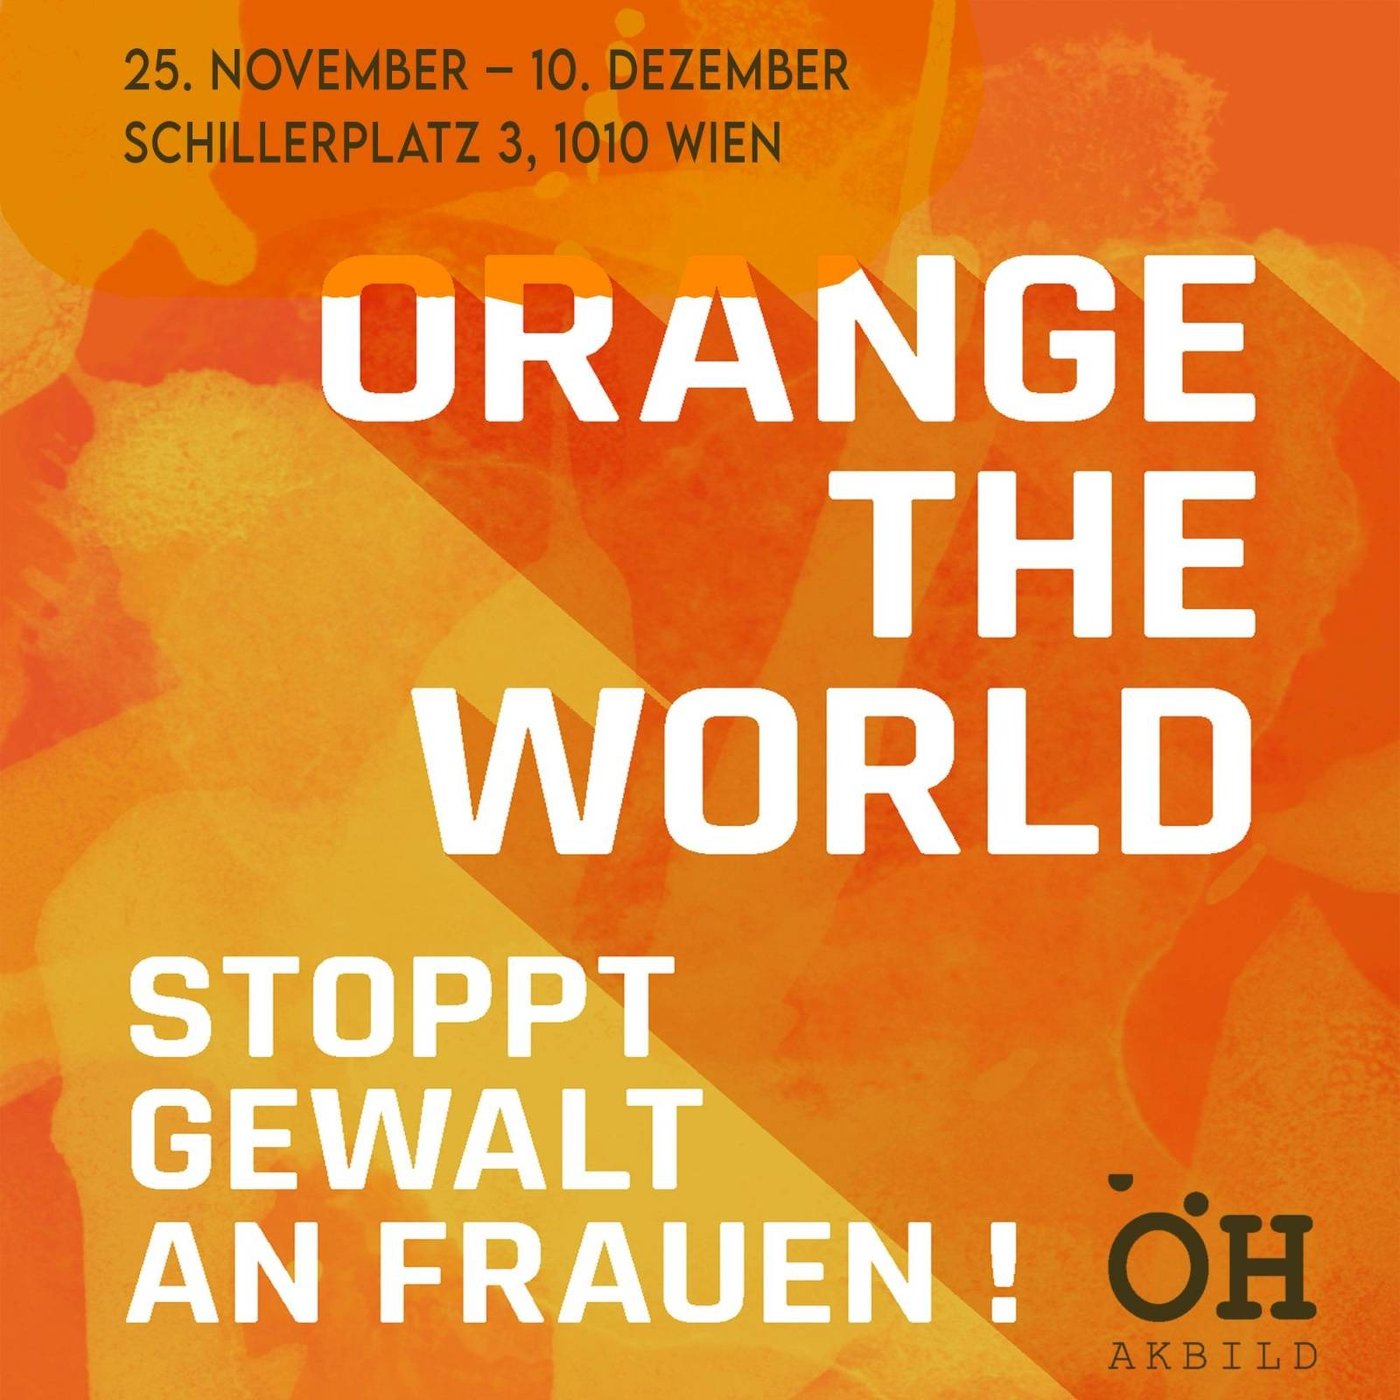 Orange the world - 16 days against violence against women is an annual international campaign that starts on November 25, the International Day for the Elimination of Violence against Women, and ends on December 10, Human Rights Day. The Academy of Fine Arts is again in solidarity with the
  
   Orange the World
  
  campaign in 2021 and will illuminate the building at Schillerplatz during this period.